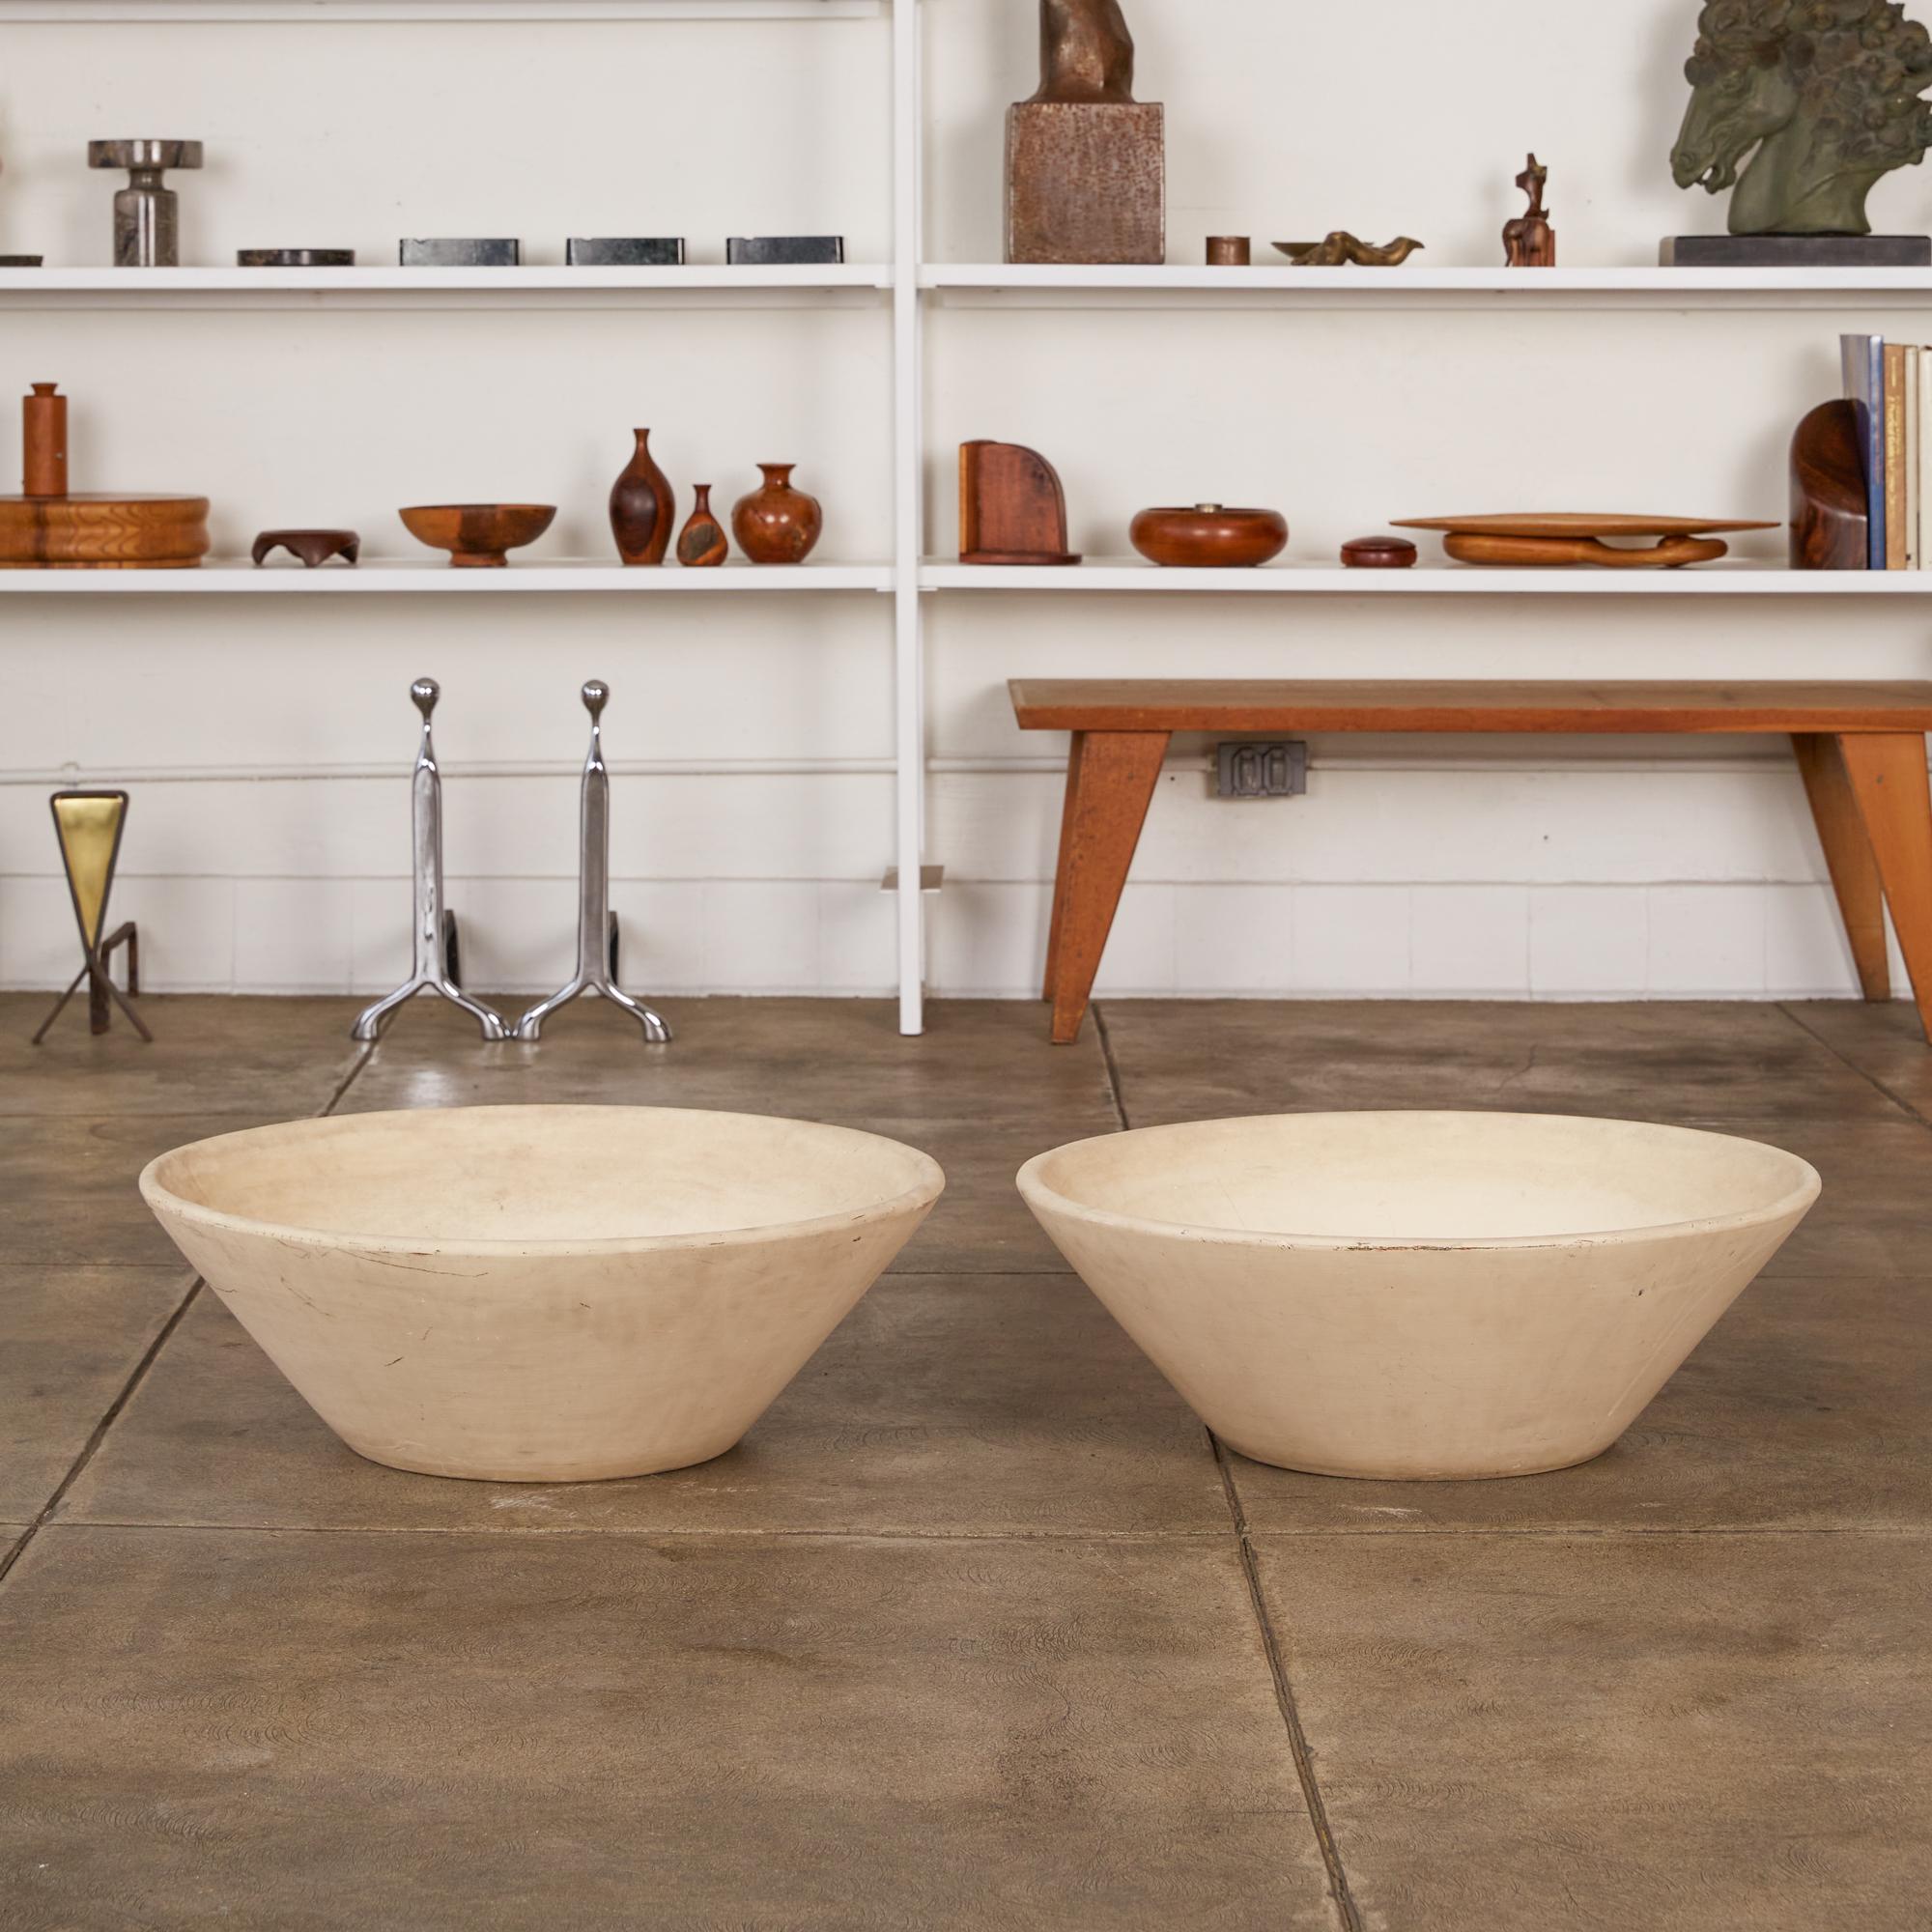 Pair of Lagardo Tackett’s iconic planters for Architectural Pottery, colloquially known as the “wok,” has sharply angled sides, smooth edges with no lip, and a flat foot. These examples are patinated and weathered from outdoor use, with a warm cast